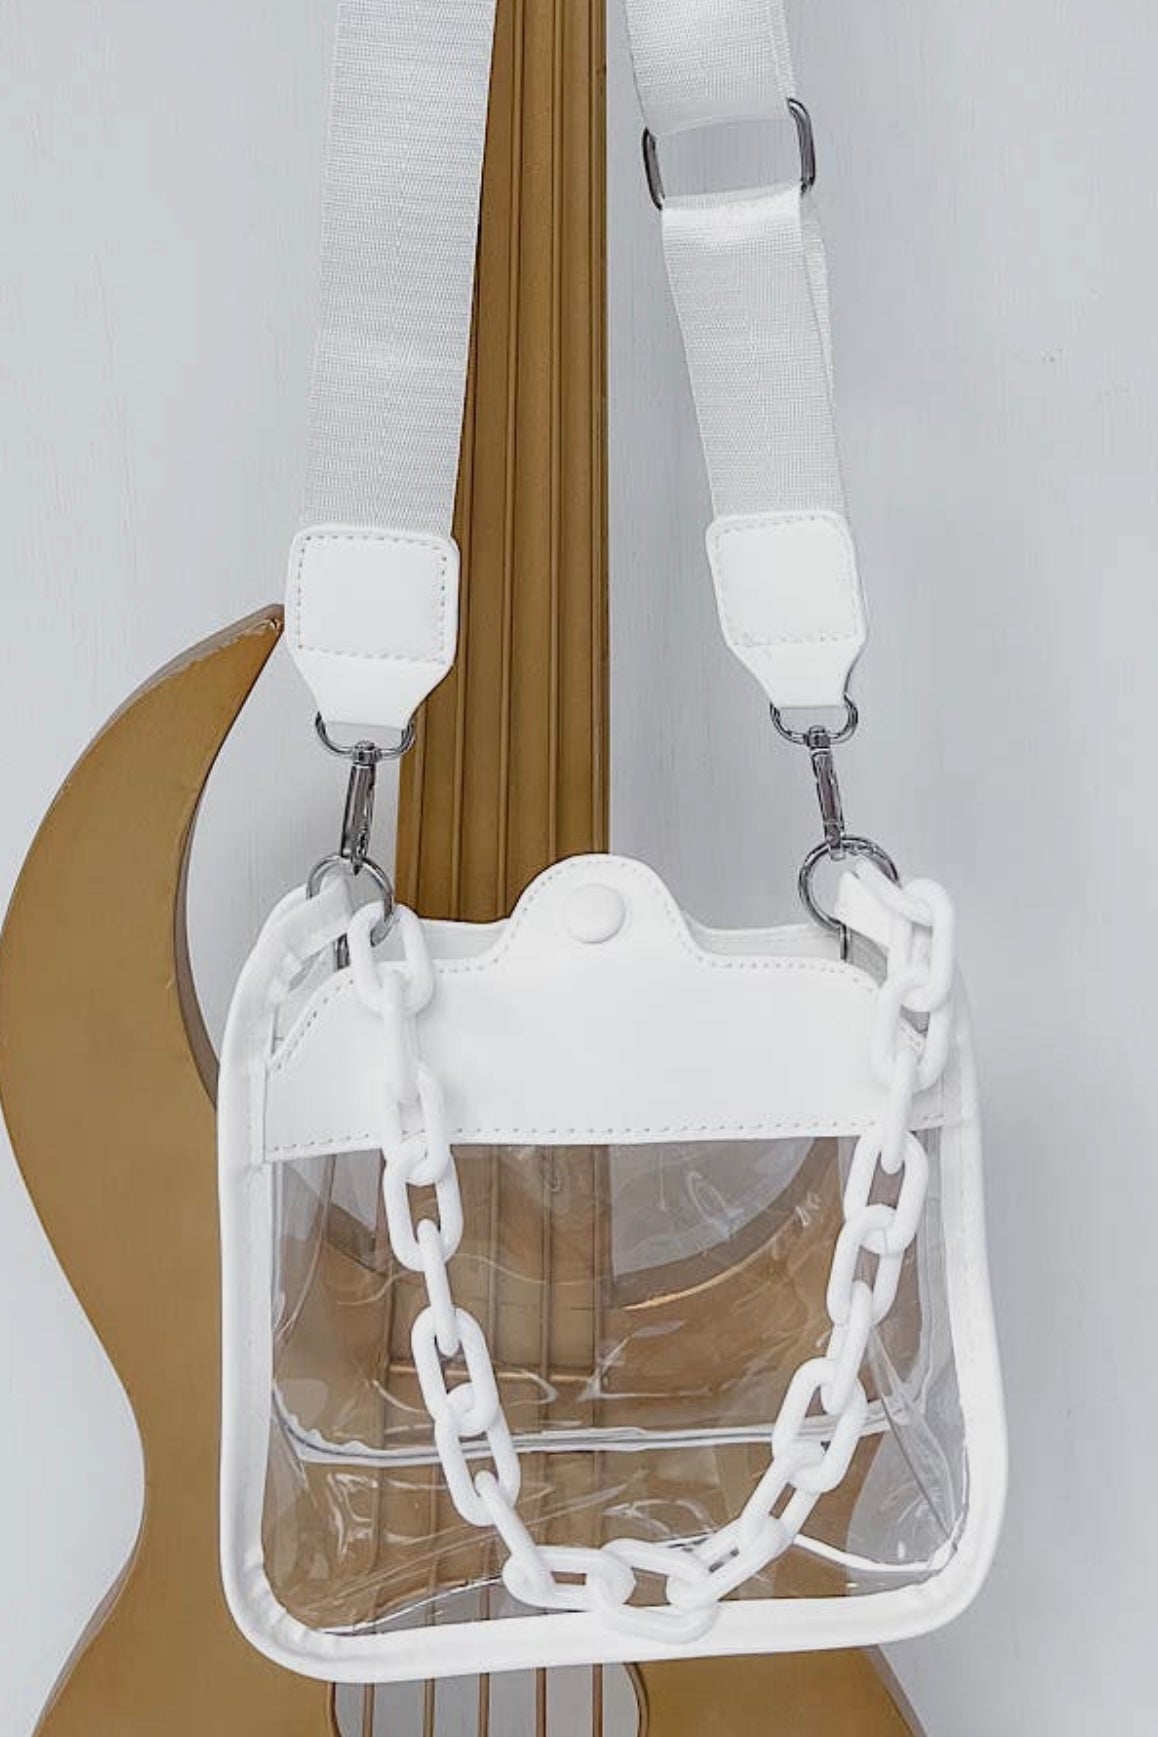 The Show Off Clear Crossbody features an adjustable strap for just the right fit + the cutest matching chain to also carry as a handbag! It‘s perfect for events that require clear bags such as sporting events or concerts, as well as for everyday use. These offer a stylish way to carry your essentials while keeping them visible + easily accessible!